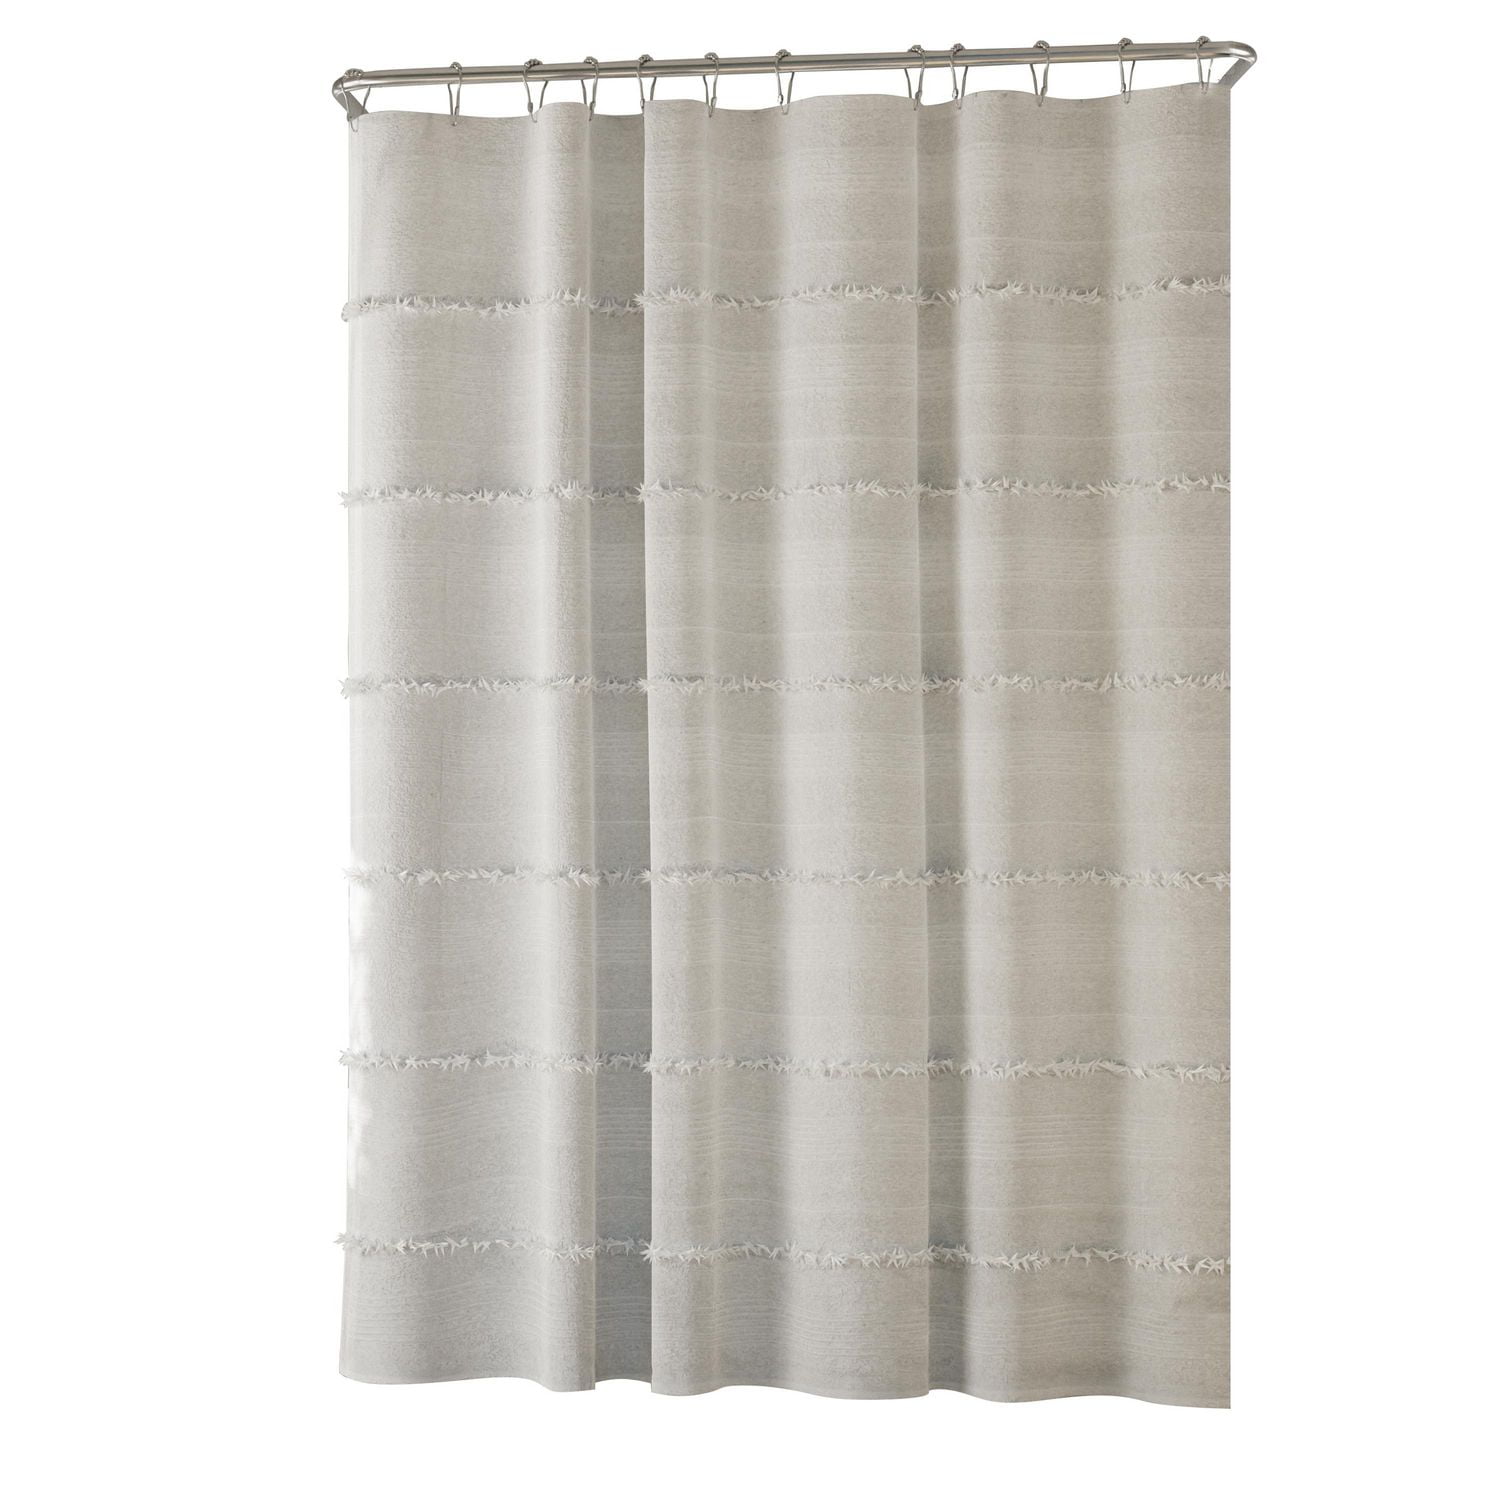 Hometrends Graham Tufted Loop Heavy Weight Woven Fabric Shower Curtain,  White, Heavy Weight Shower Curtain 